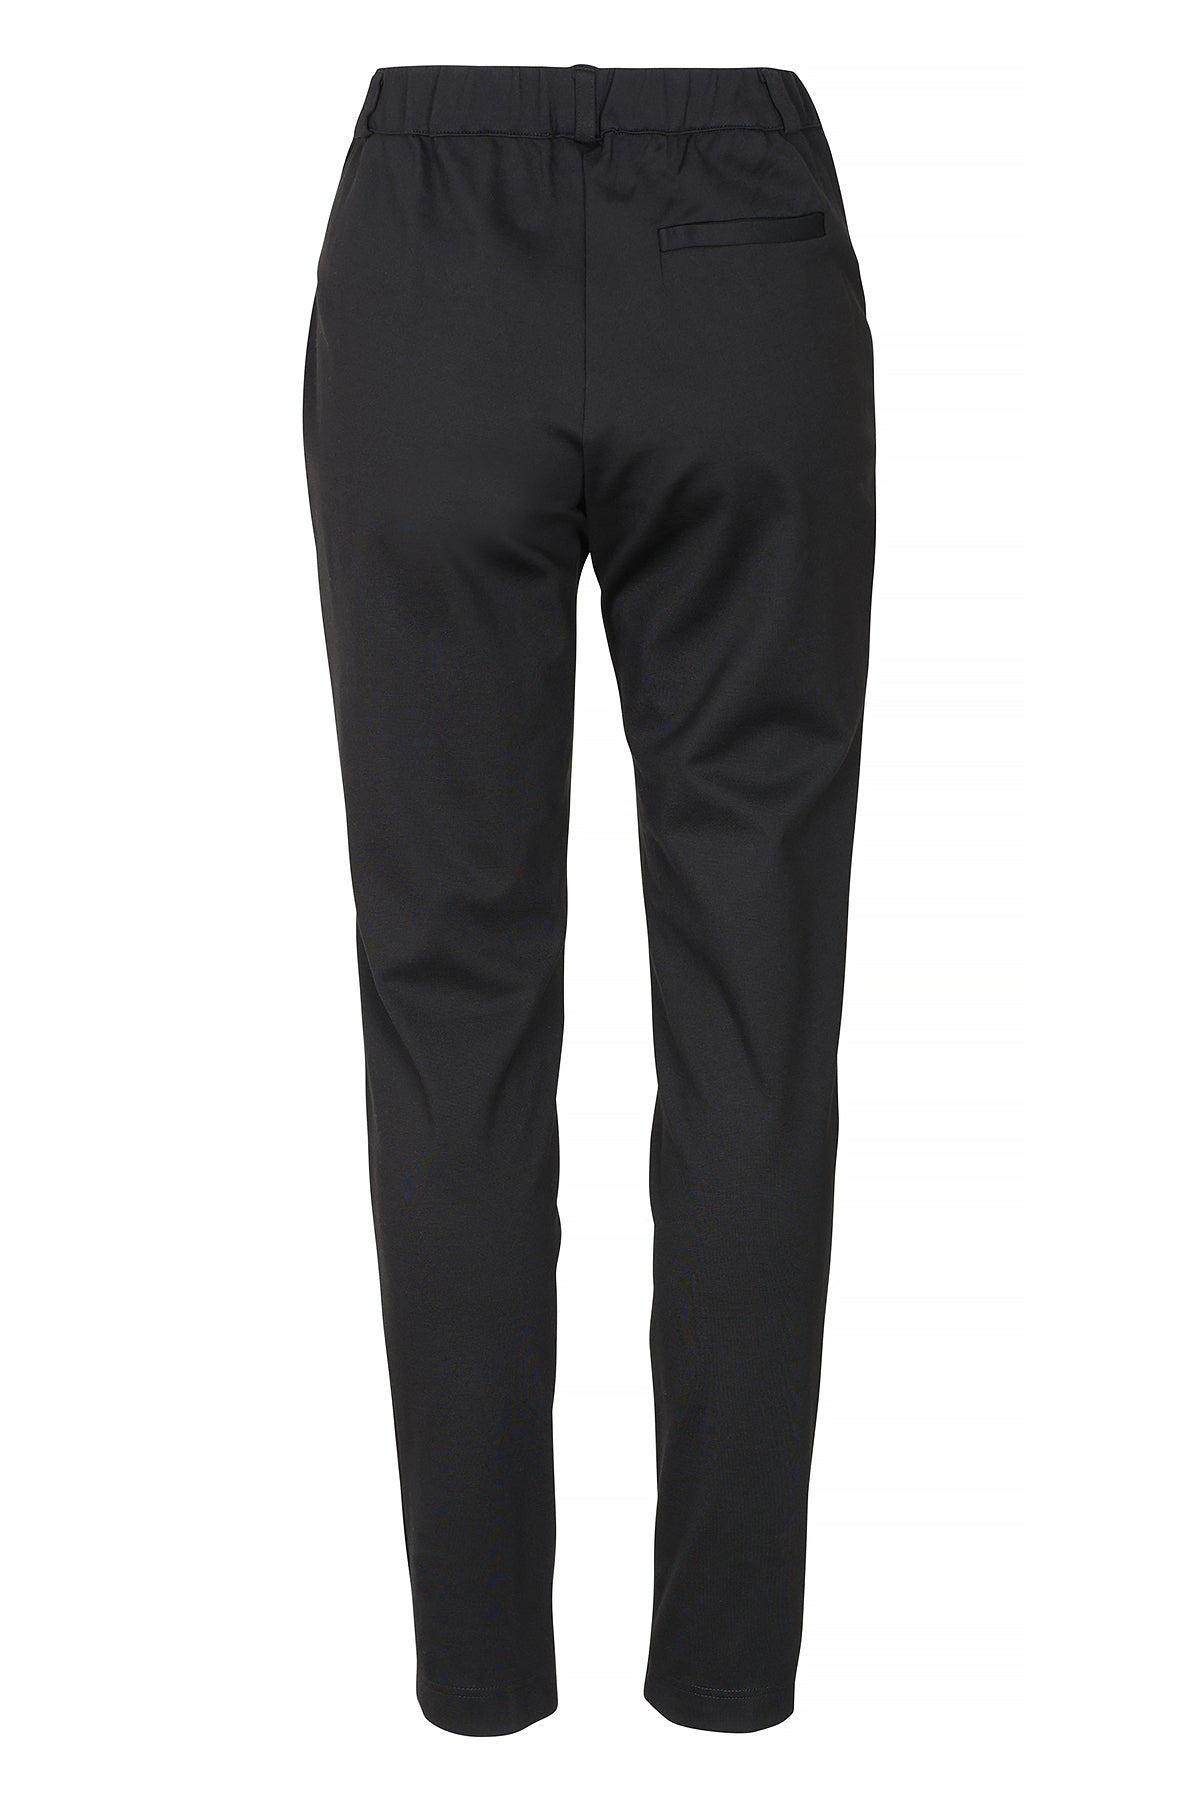 LUXZUZ // ONE TWO Rise Pant Pant 999 Black